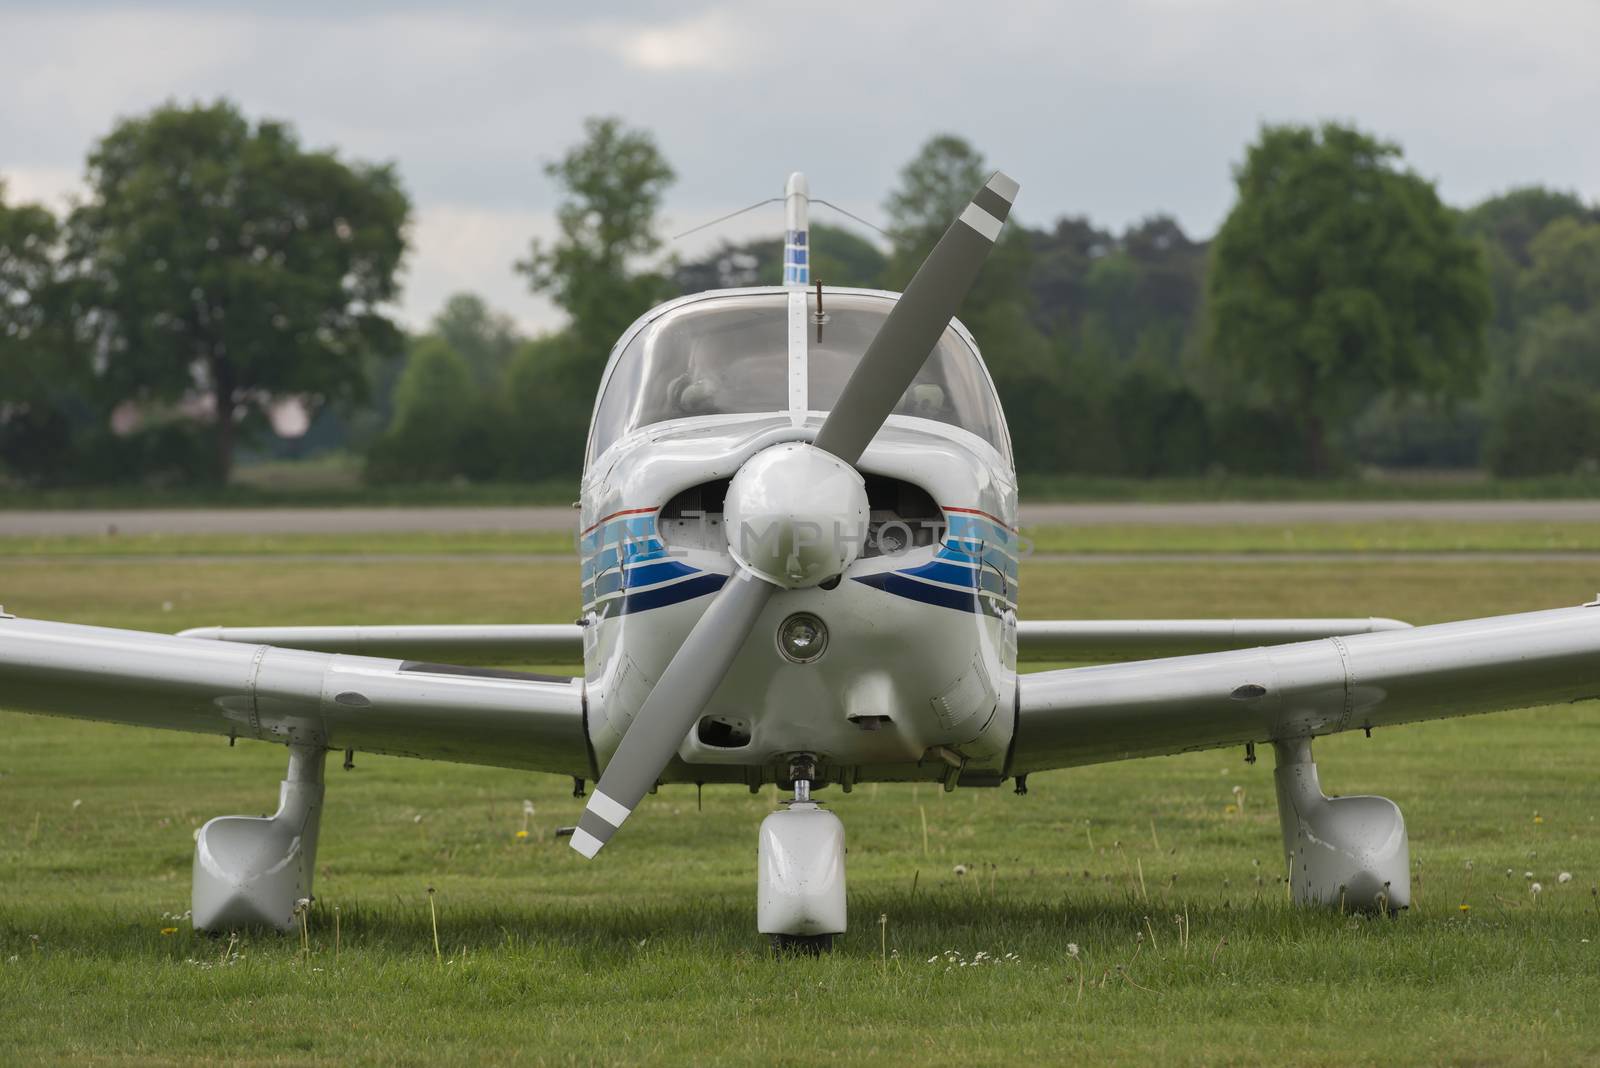 Front view of a plane on a lawn
 by Tofotografie